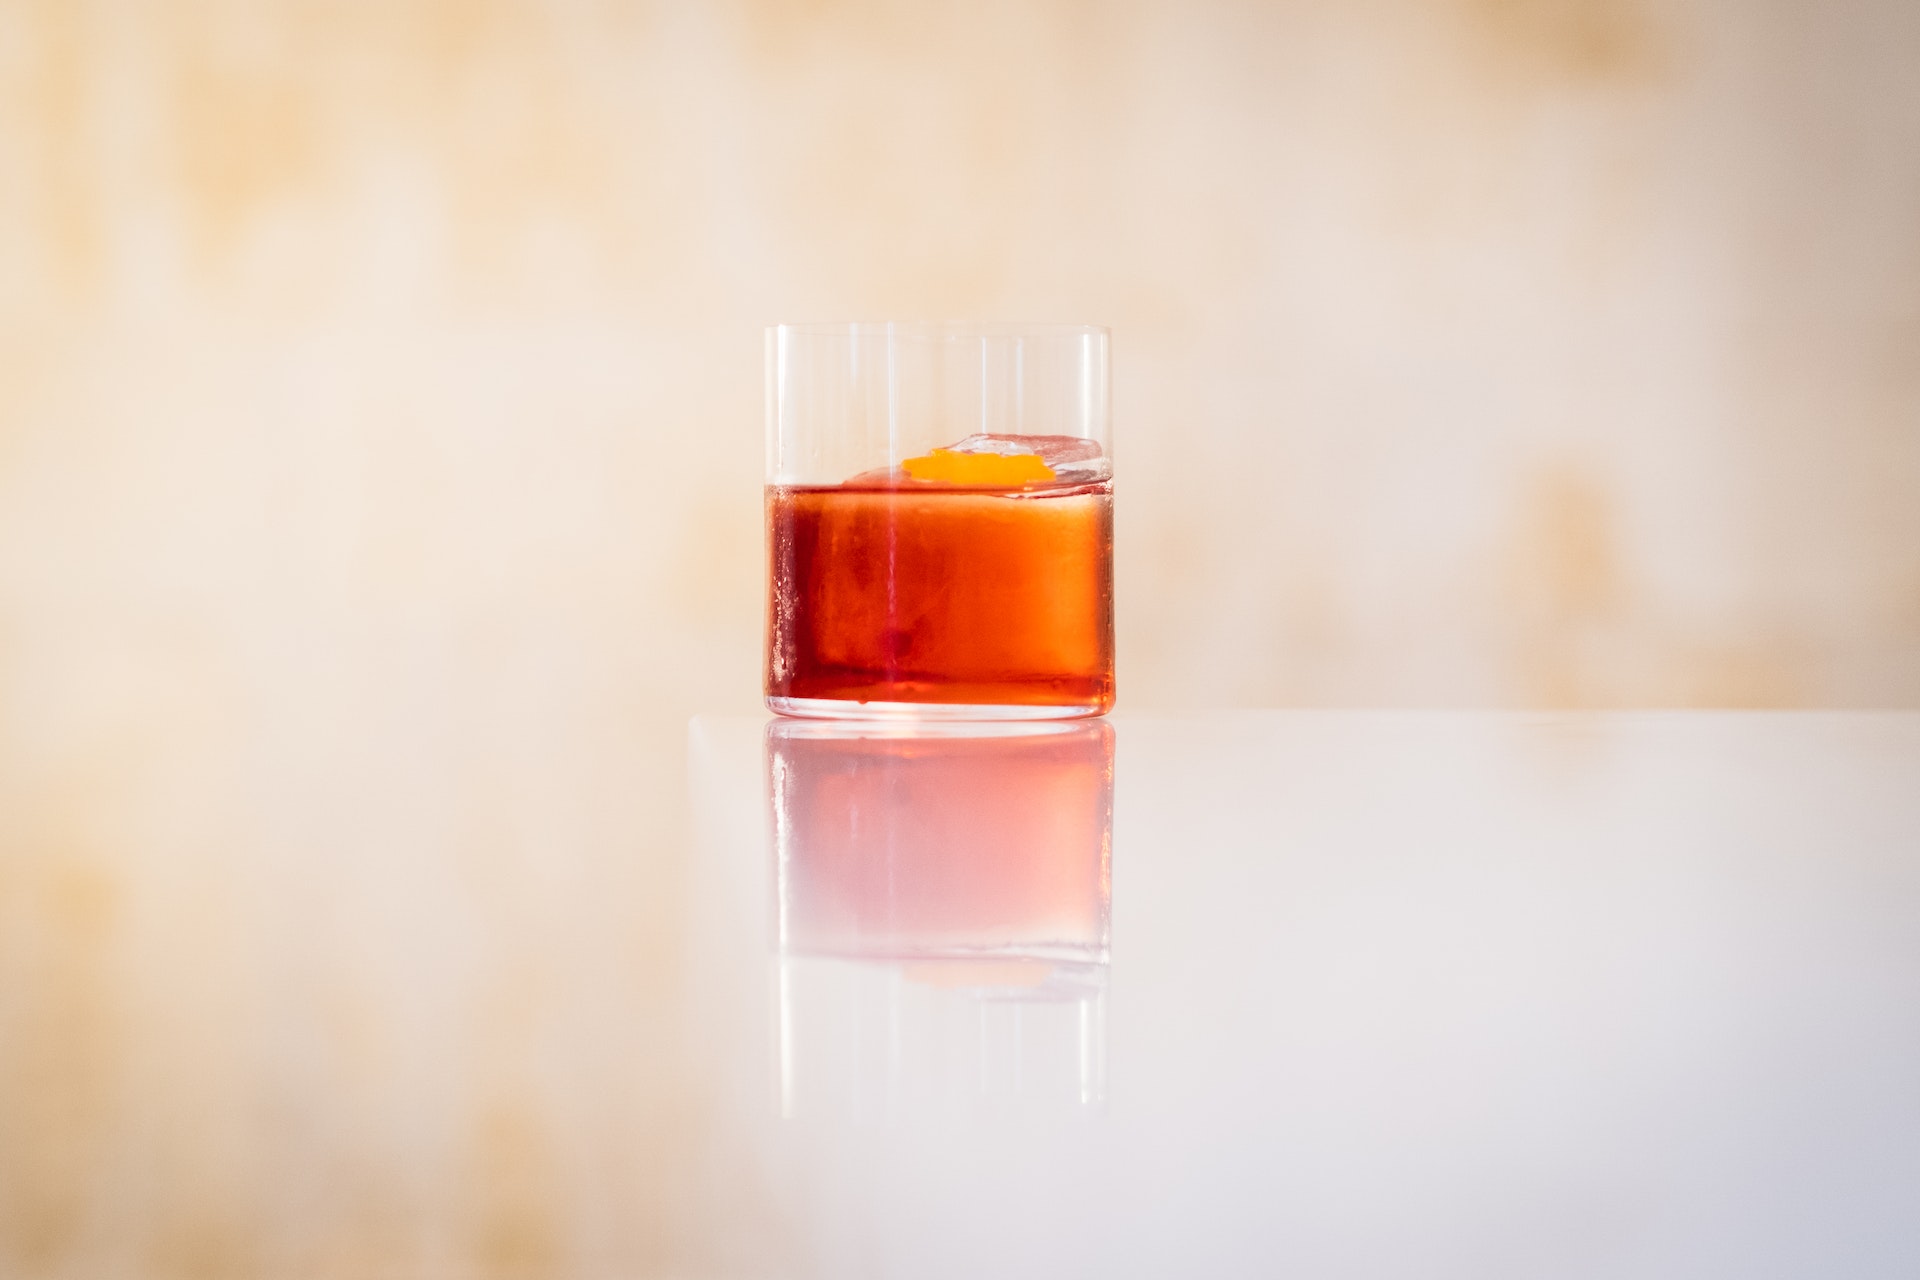 Negroni on edge of white countertop with reflection